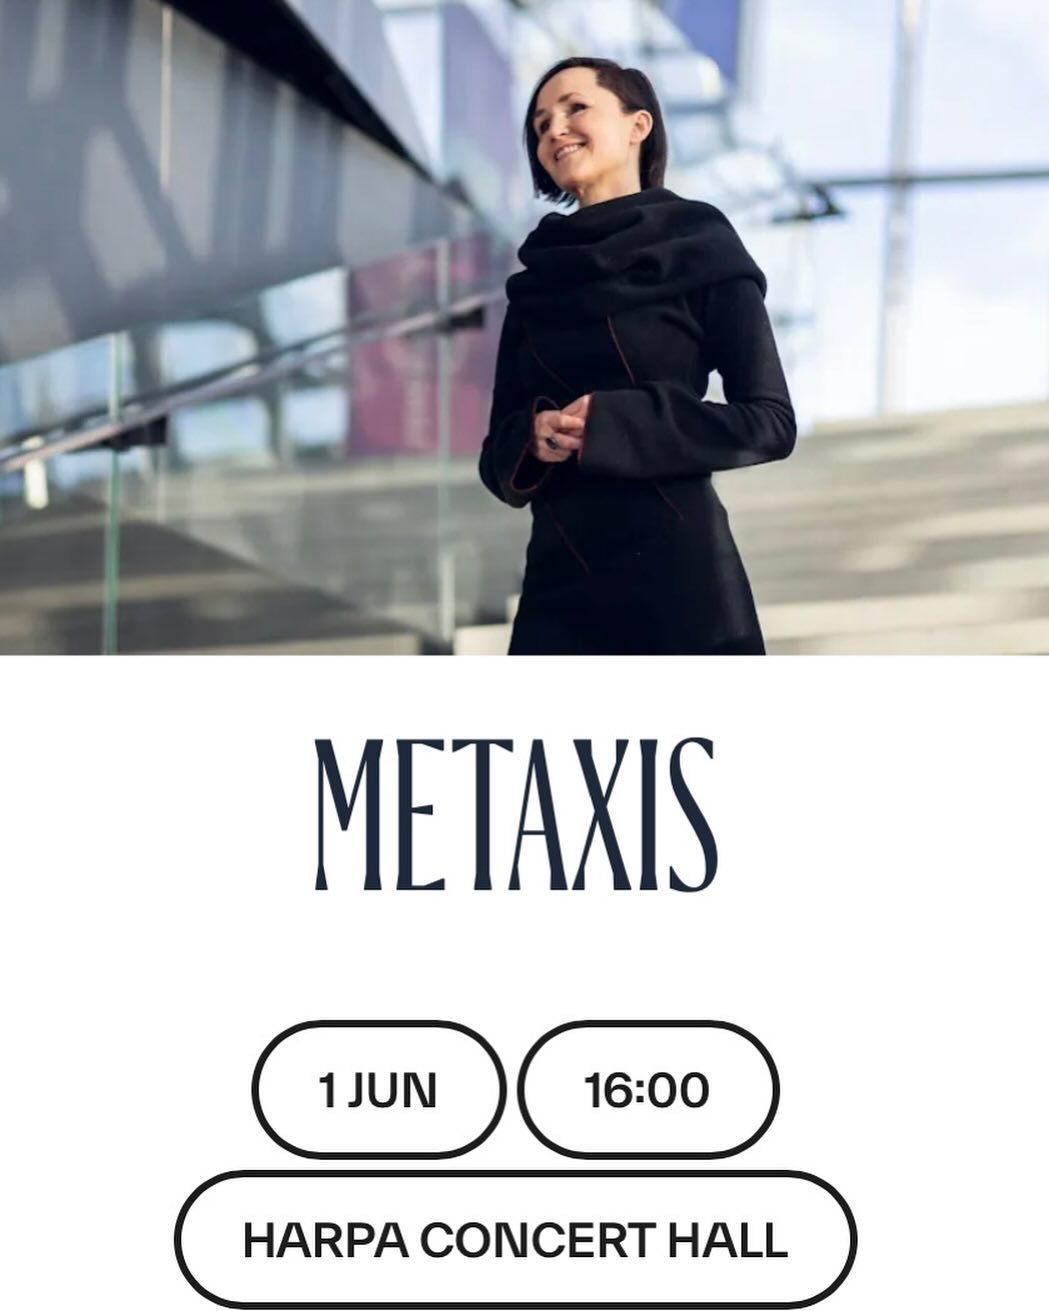 very much looking forward to the premiere of METAXIS with the @icelandsymphony and Eva Ollikainen at the opening of the @reykjavik.arts.festival on June 1st! 

METAXIS is a music-installation for deconstructed orchestra in an open space where the aud